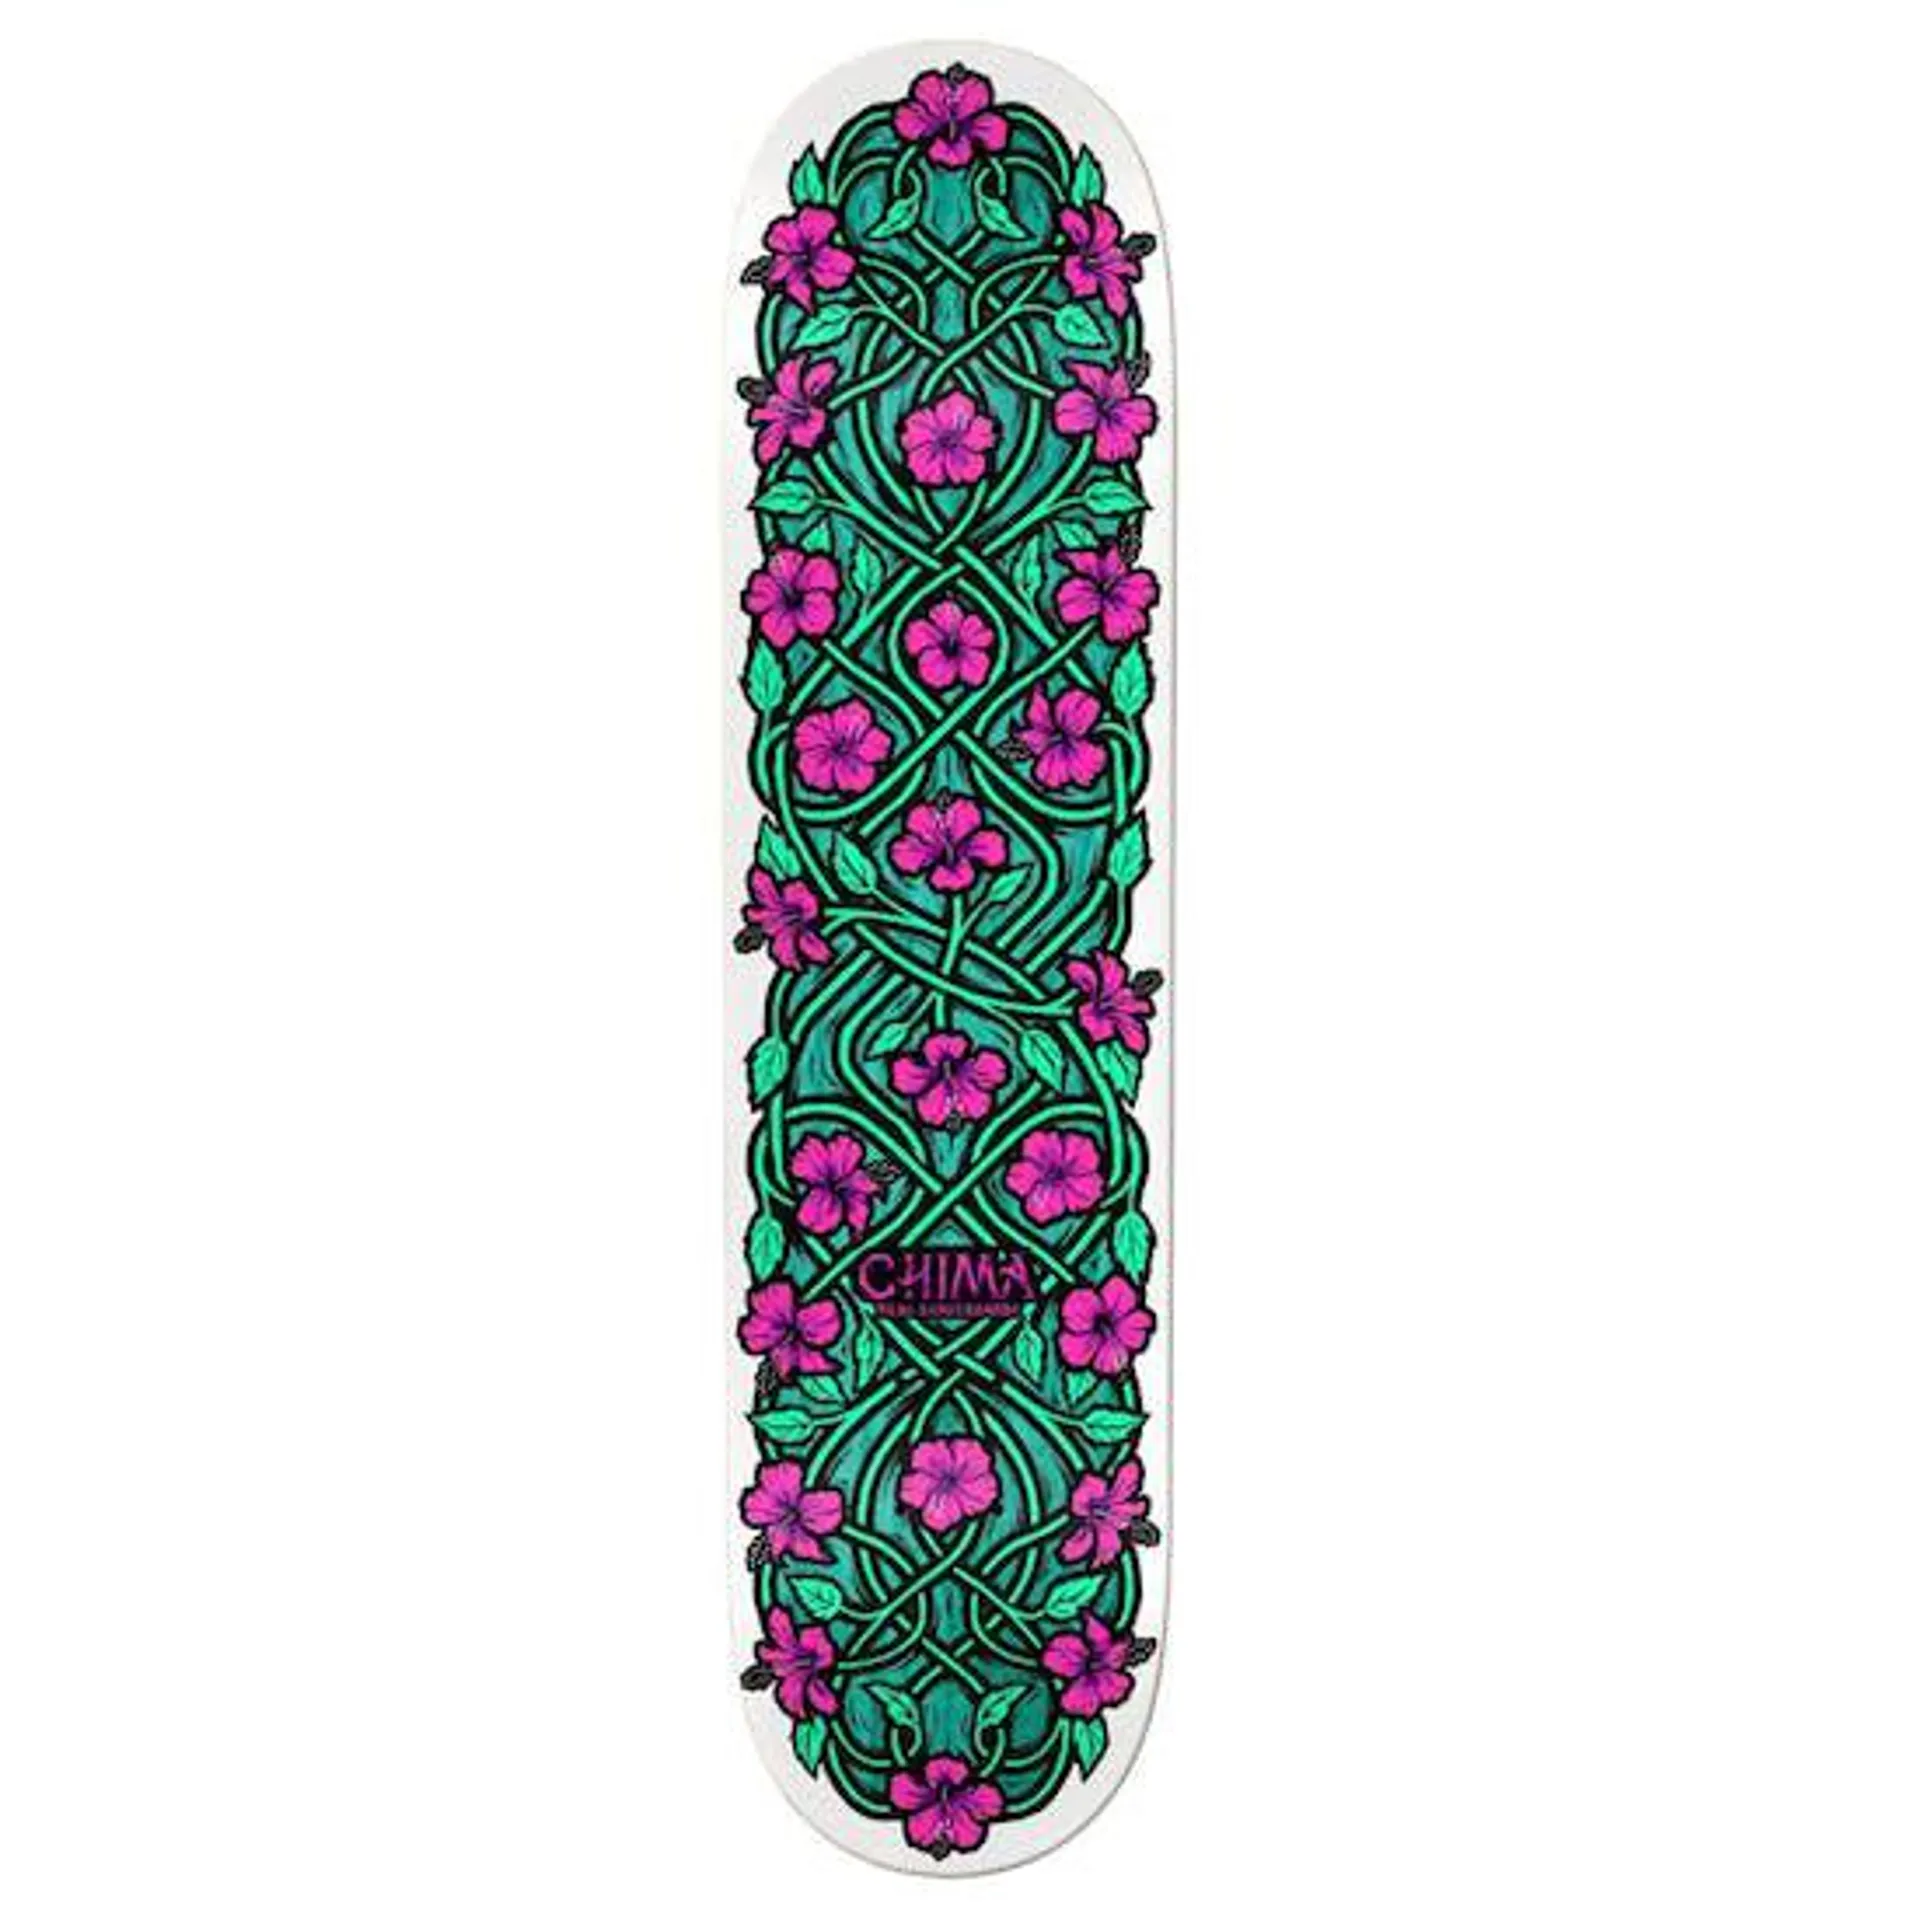 Real Chima Intertwined Skateboard Deck